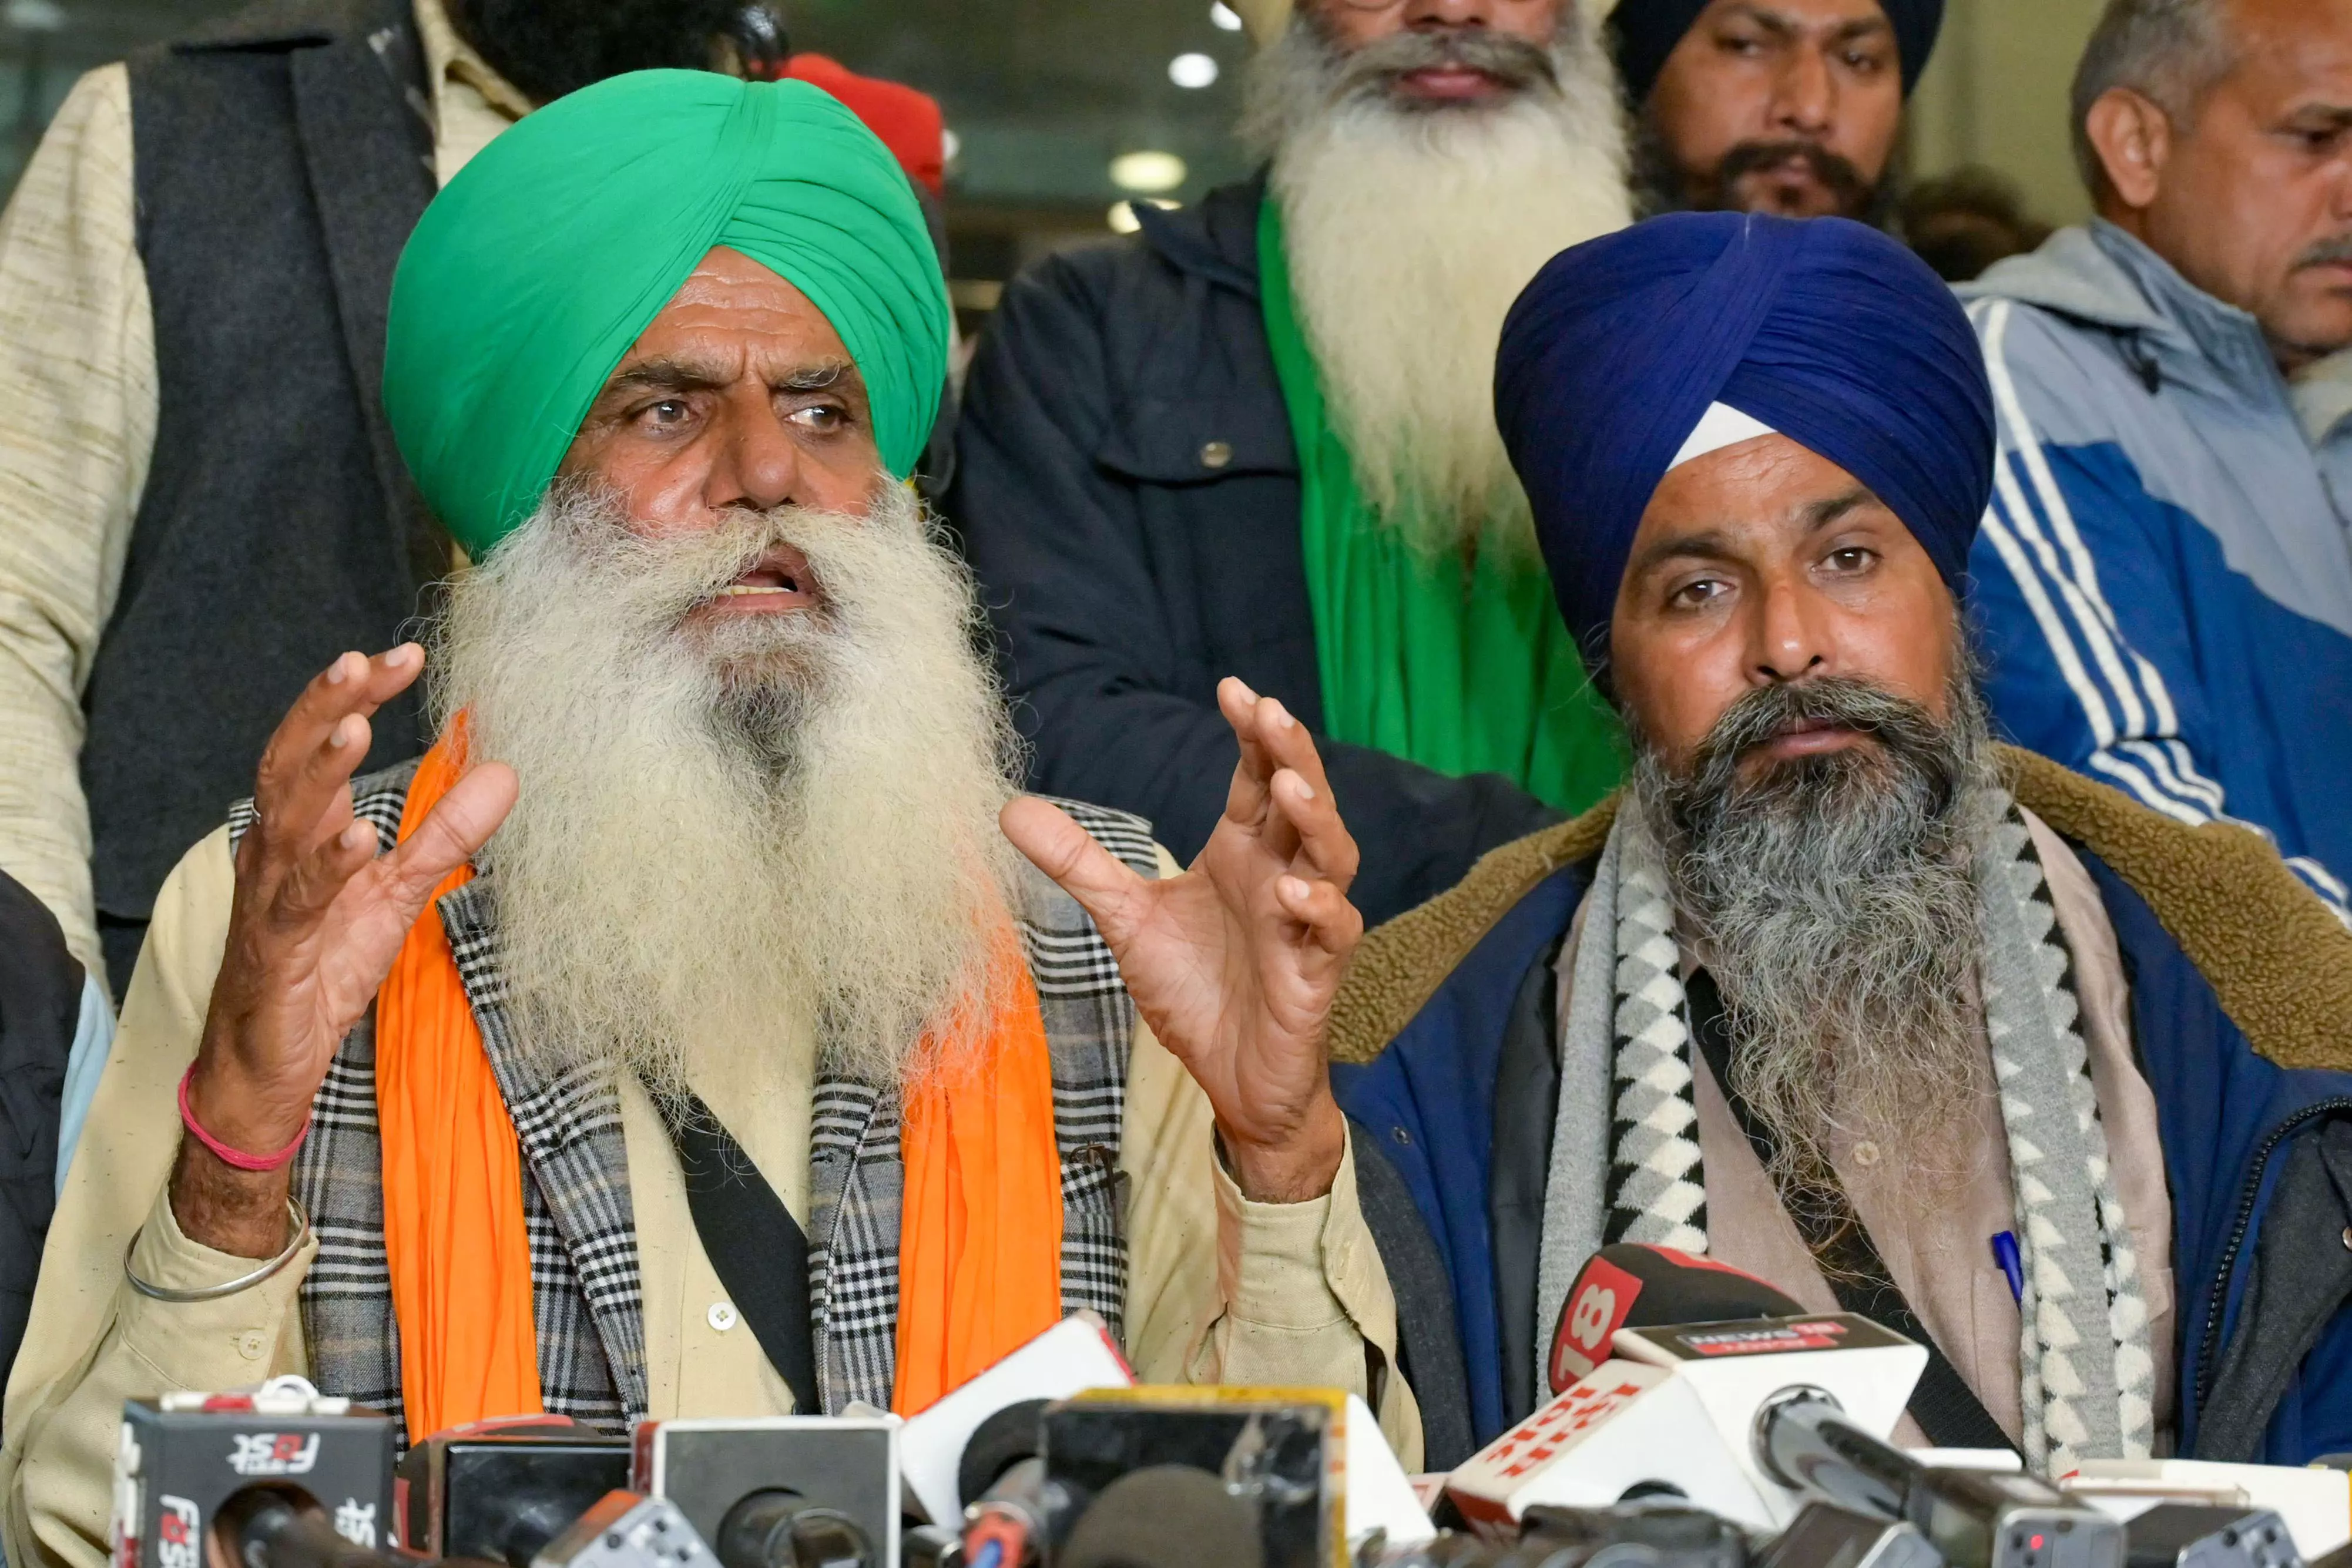 We should be allowed to protest peacefully: Farmer leader Sarwan Singh Pandher